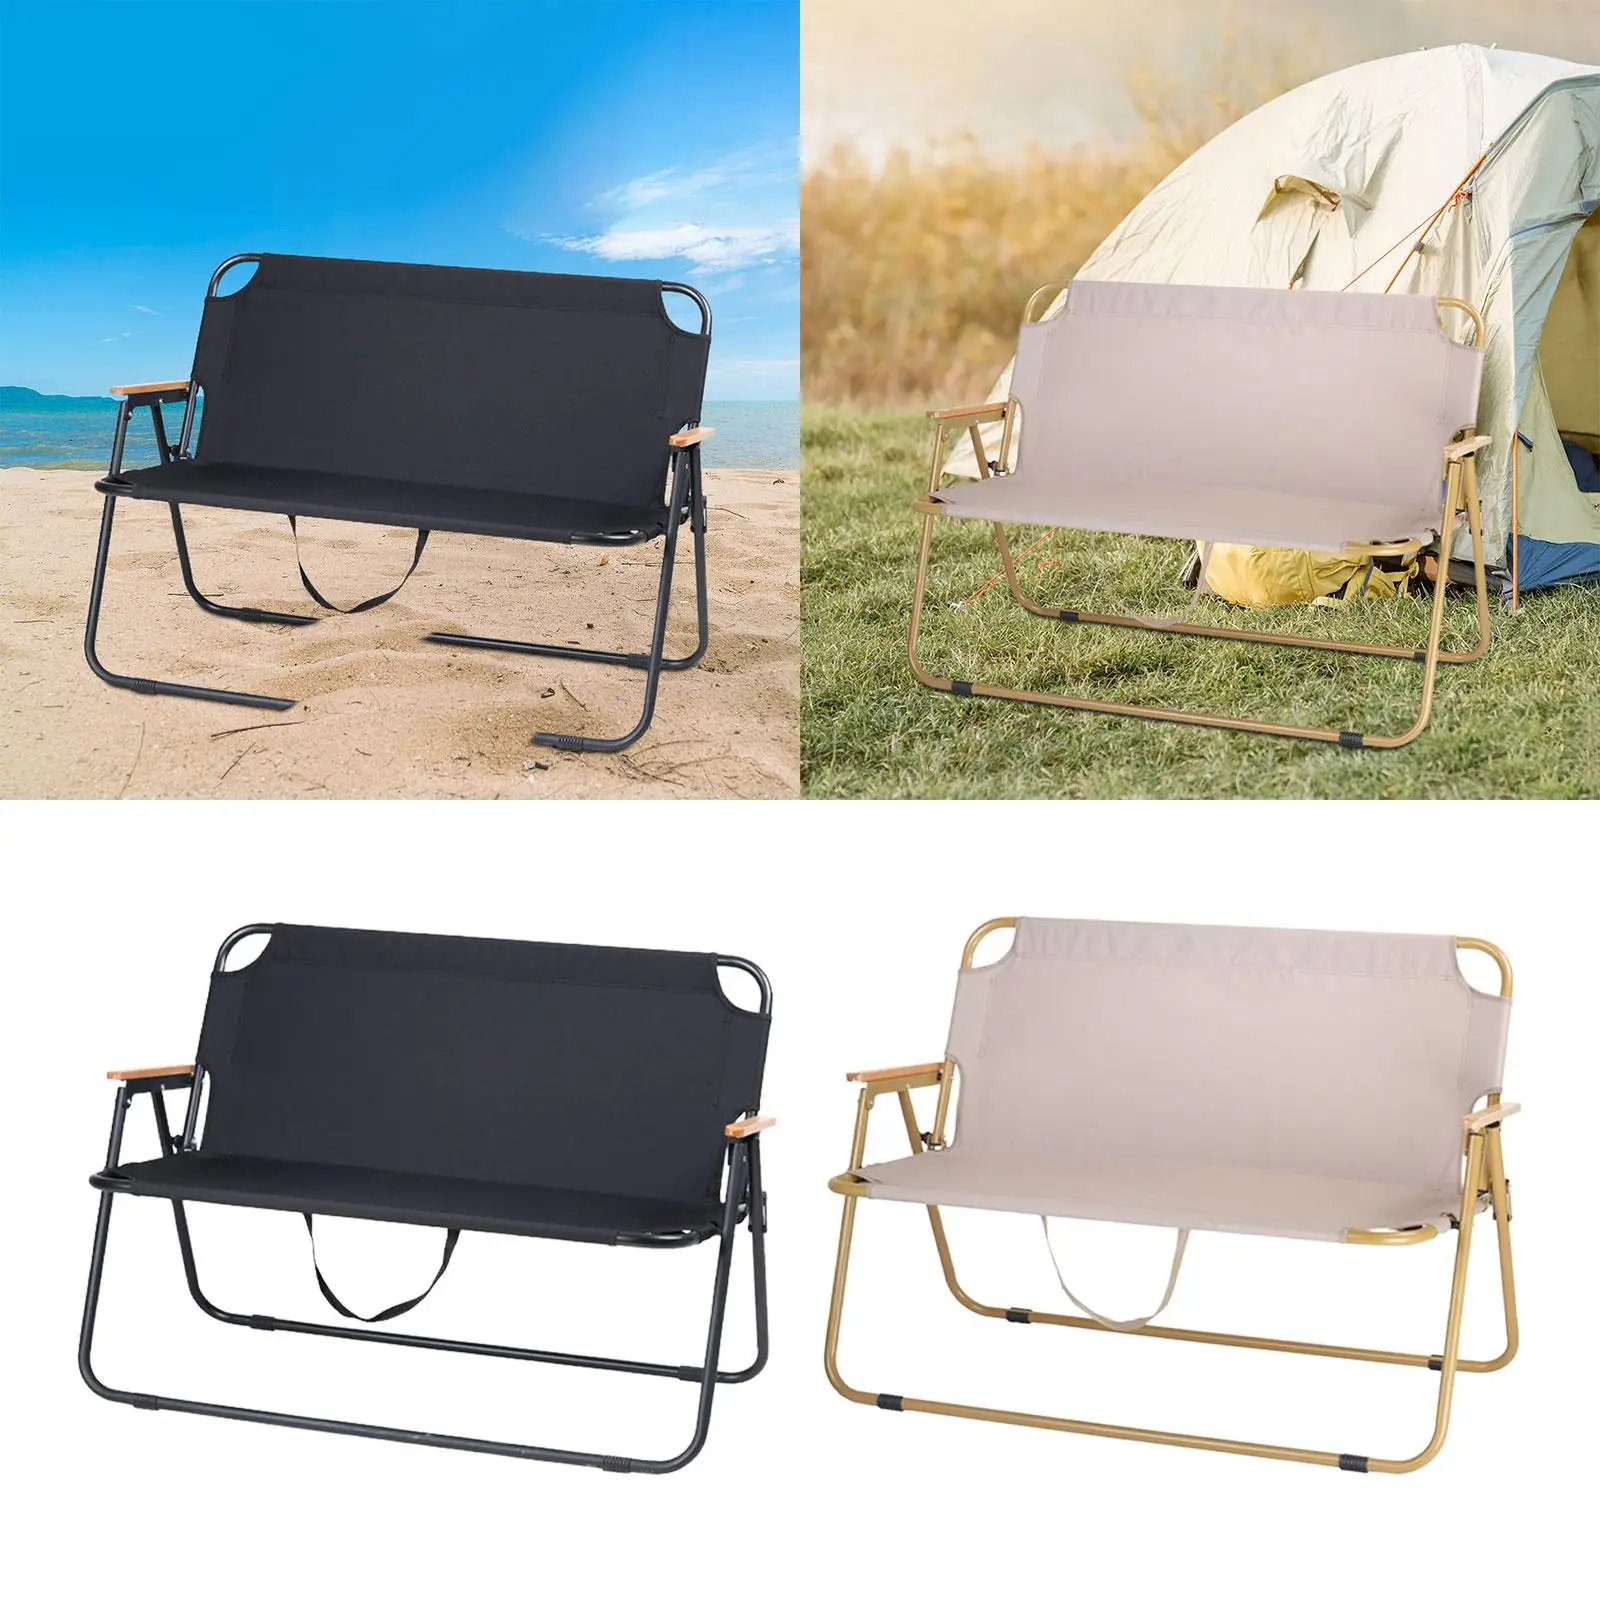 Folding Camping Chair Traveling Adult Hiking Camping Seat Fishing Patio Backpacking Double Chair Beach Chair Armchair Camp Chair